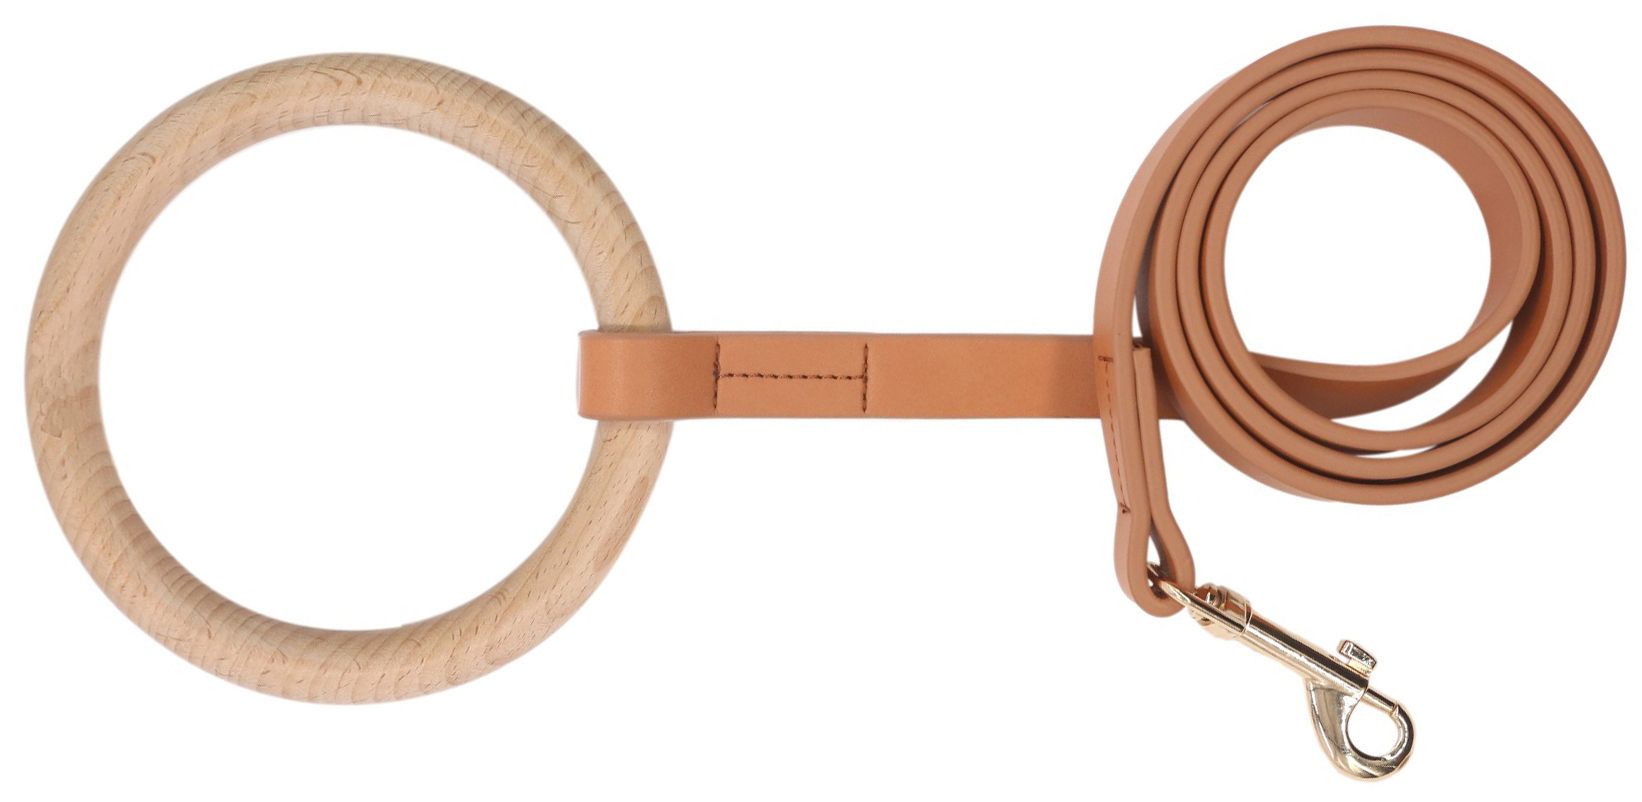 Pet Life ® 'Ever-Craft' Boutique Series Beechwood And Leather Designer Dog Leash - One Size - Brown